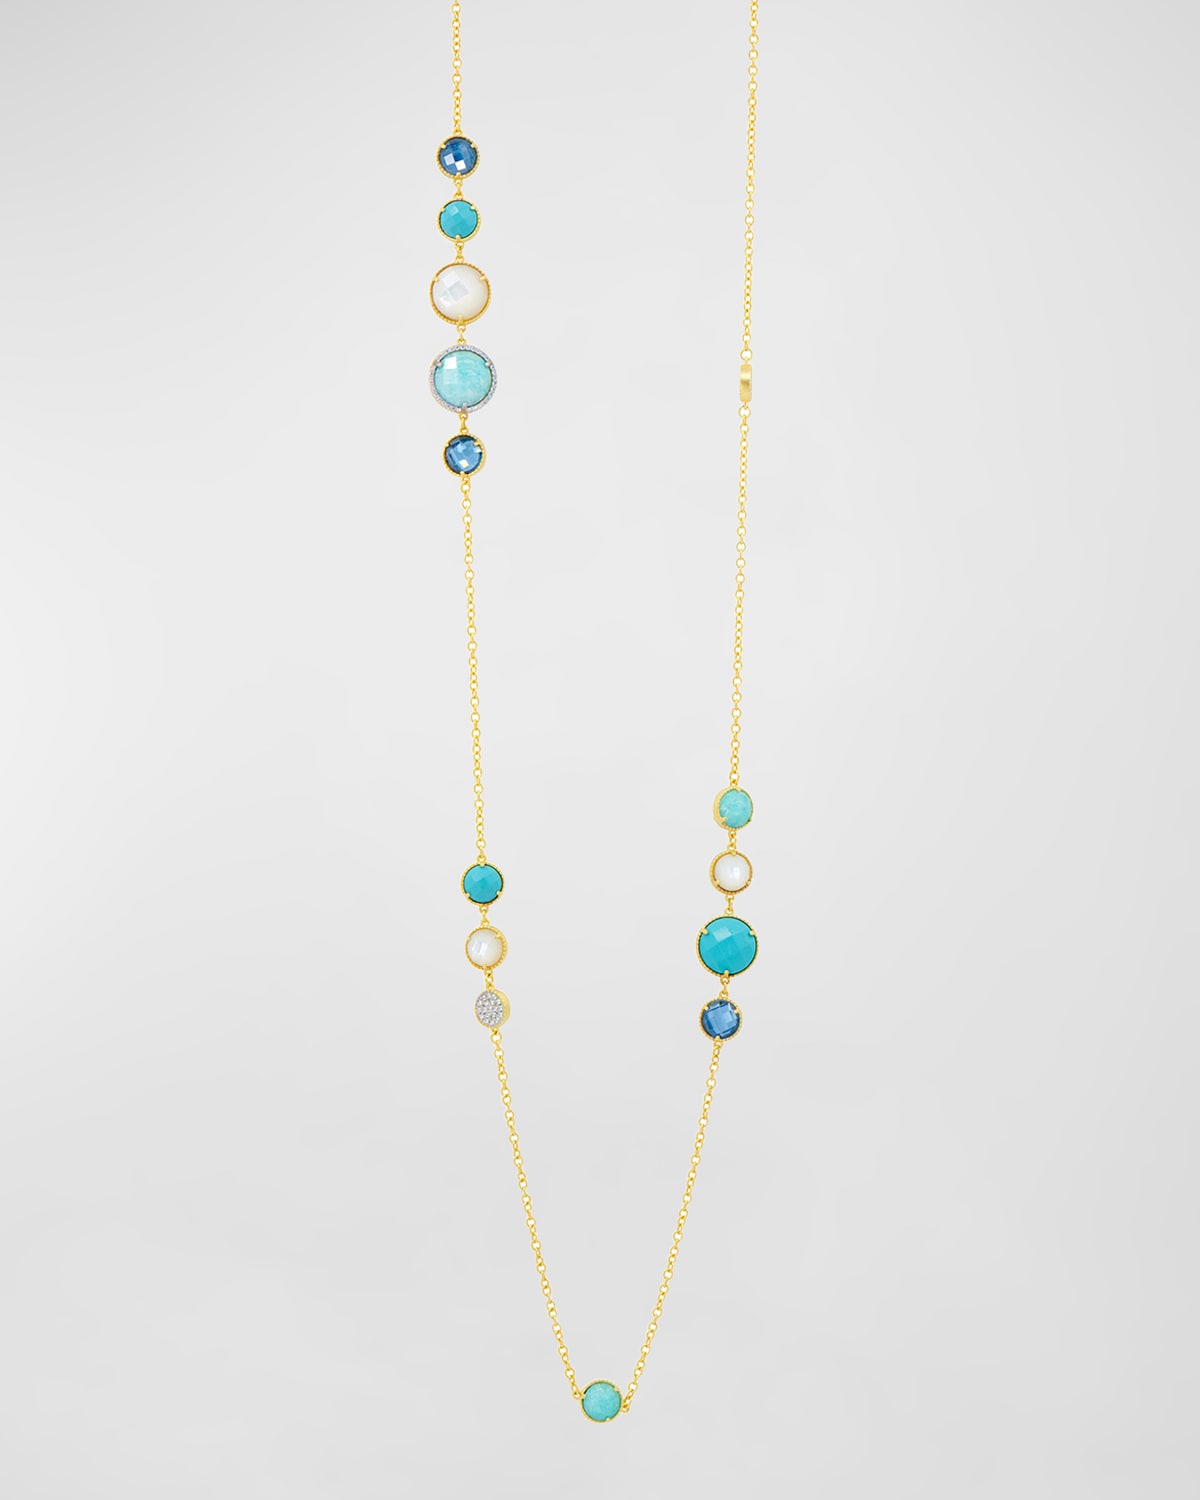 Freida Rothman Shades Of Hope Long Chain Multi-stone Necklace In Blue And Gold